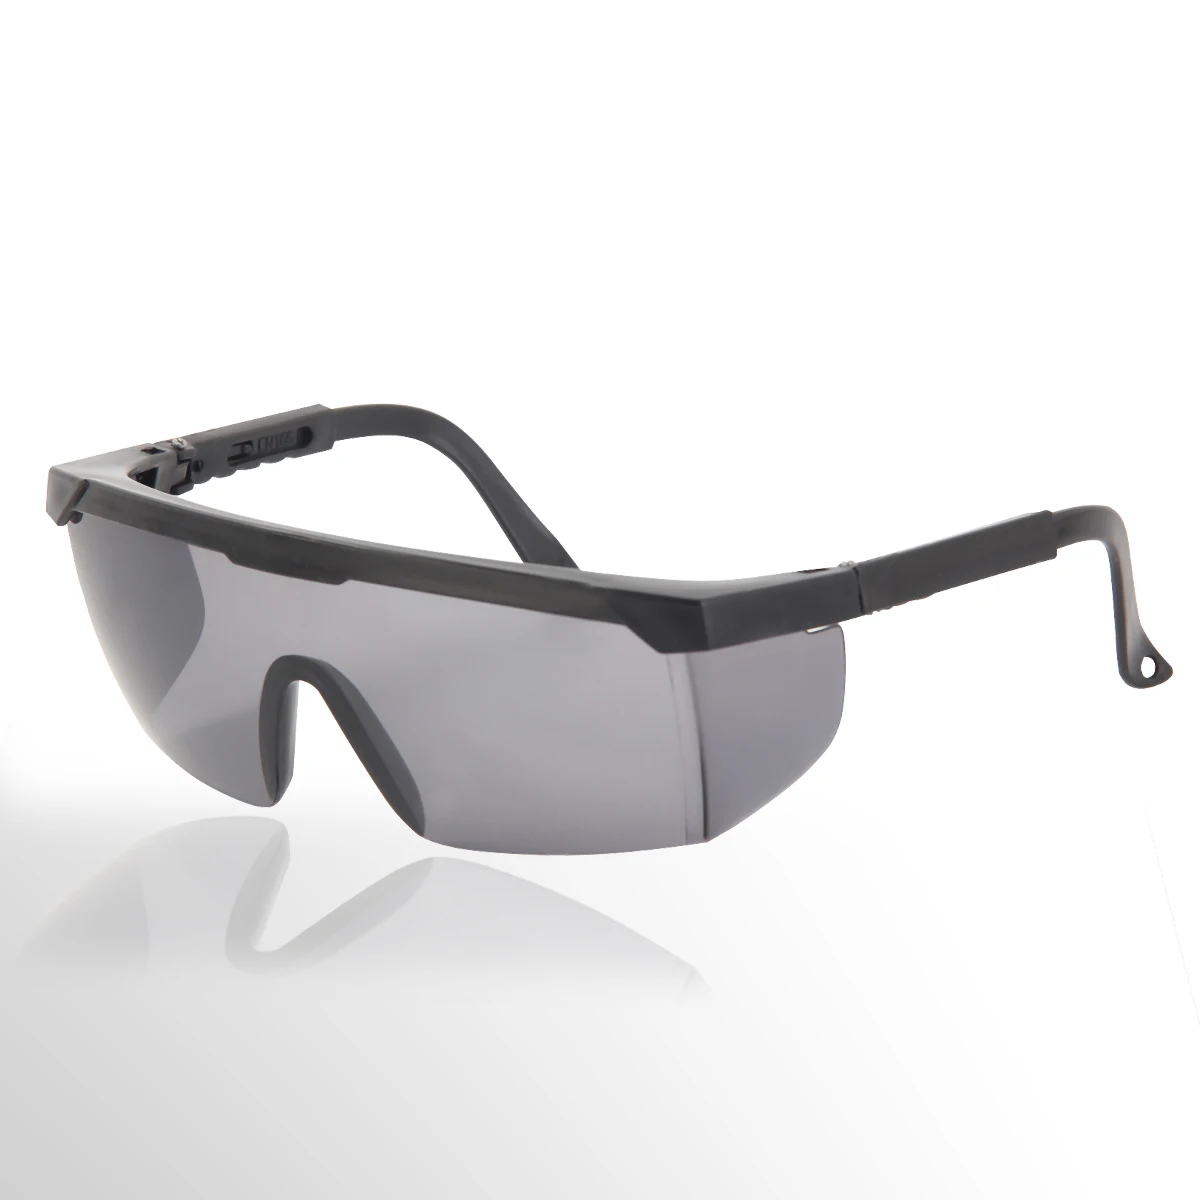 
Safety Glasses / Integra Clear Lens / Ce Certified 